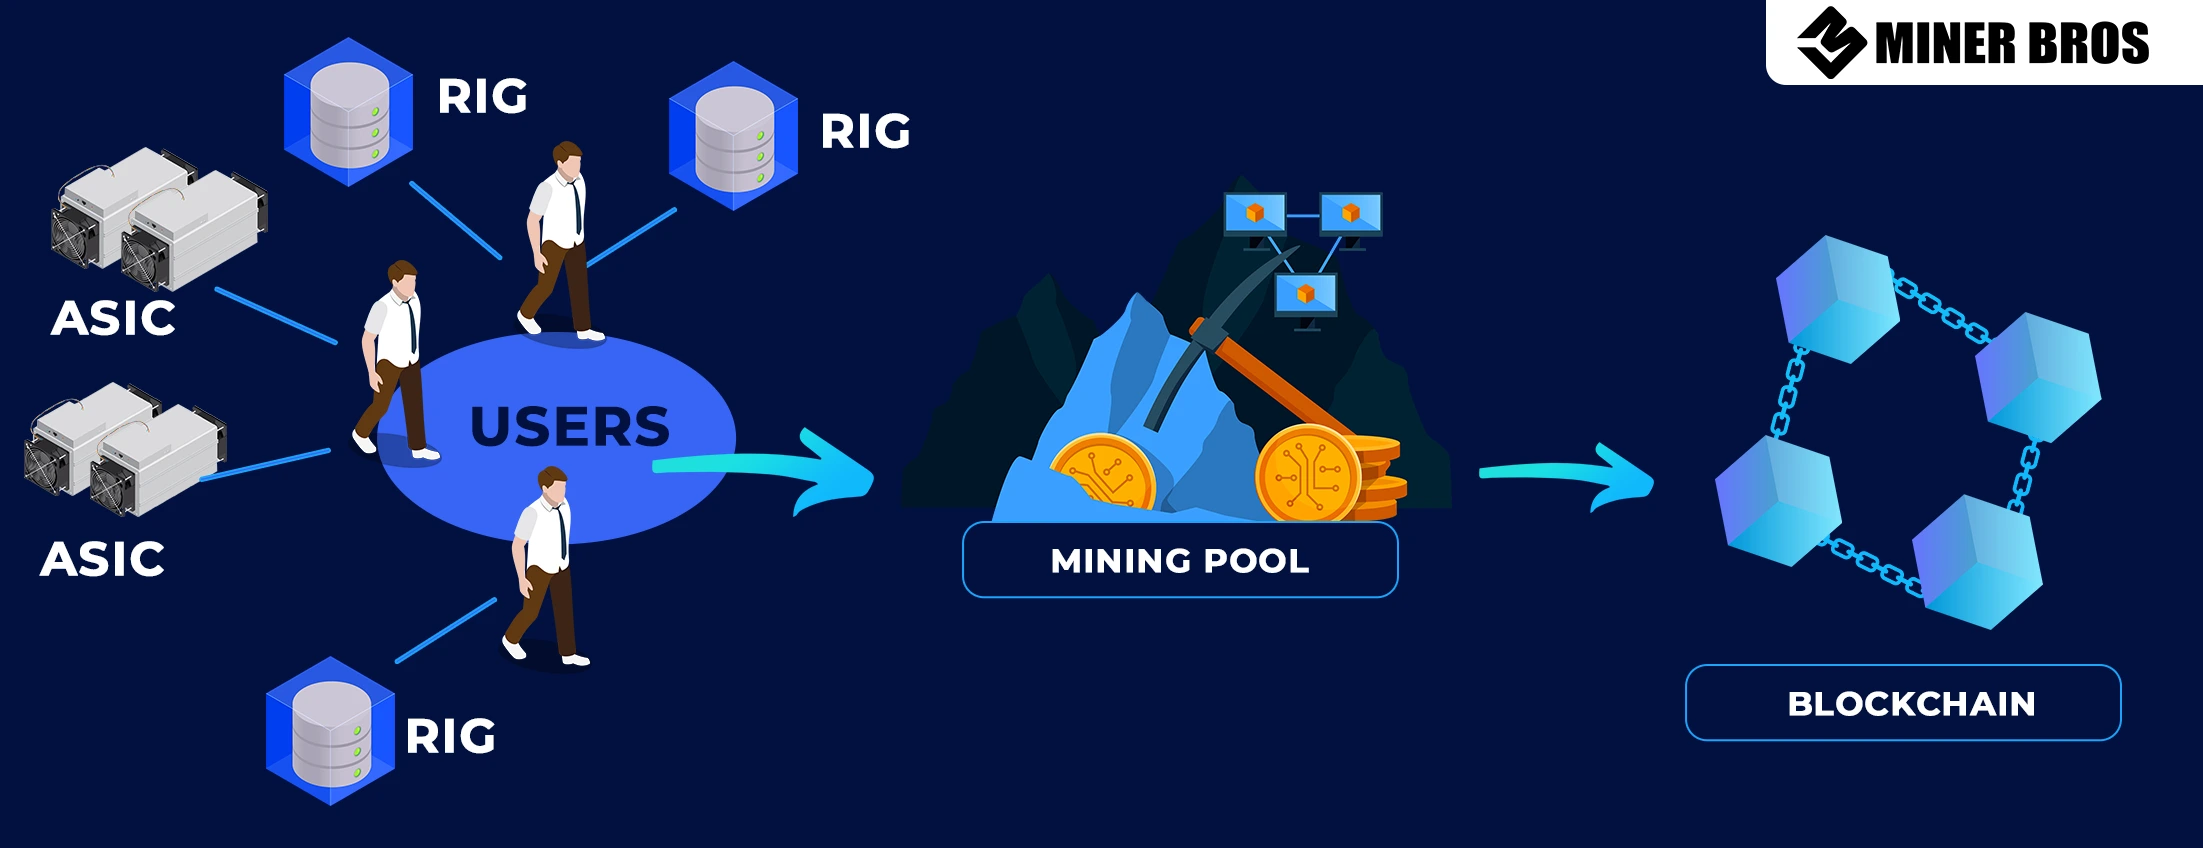 Best Cryptocurrency Mining Pools for Beginners in 